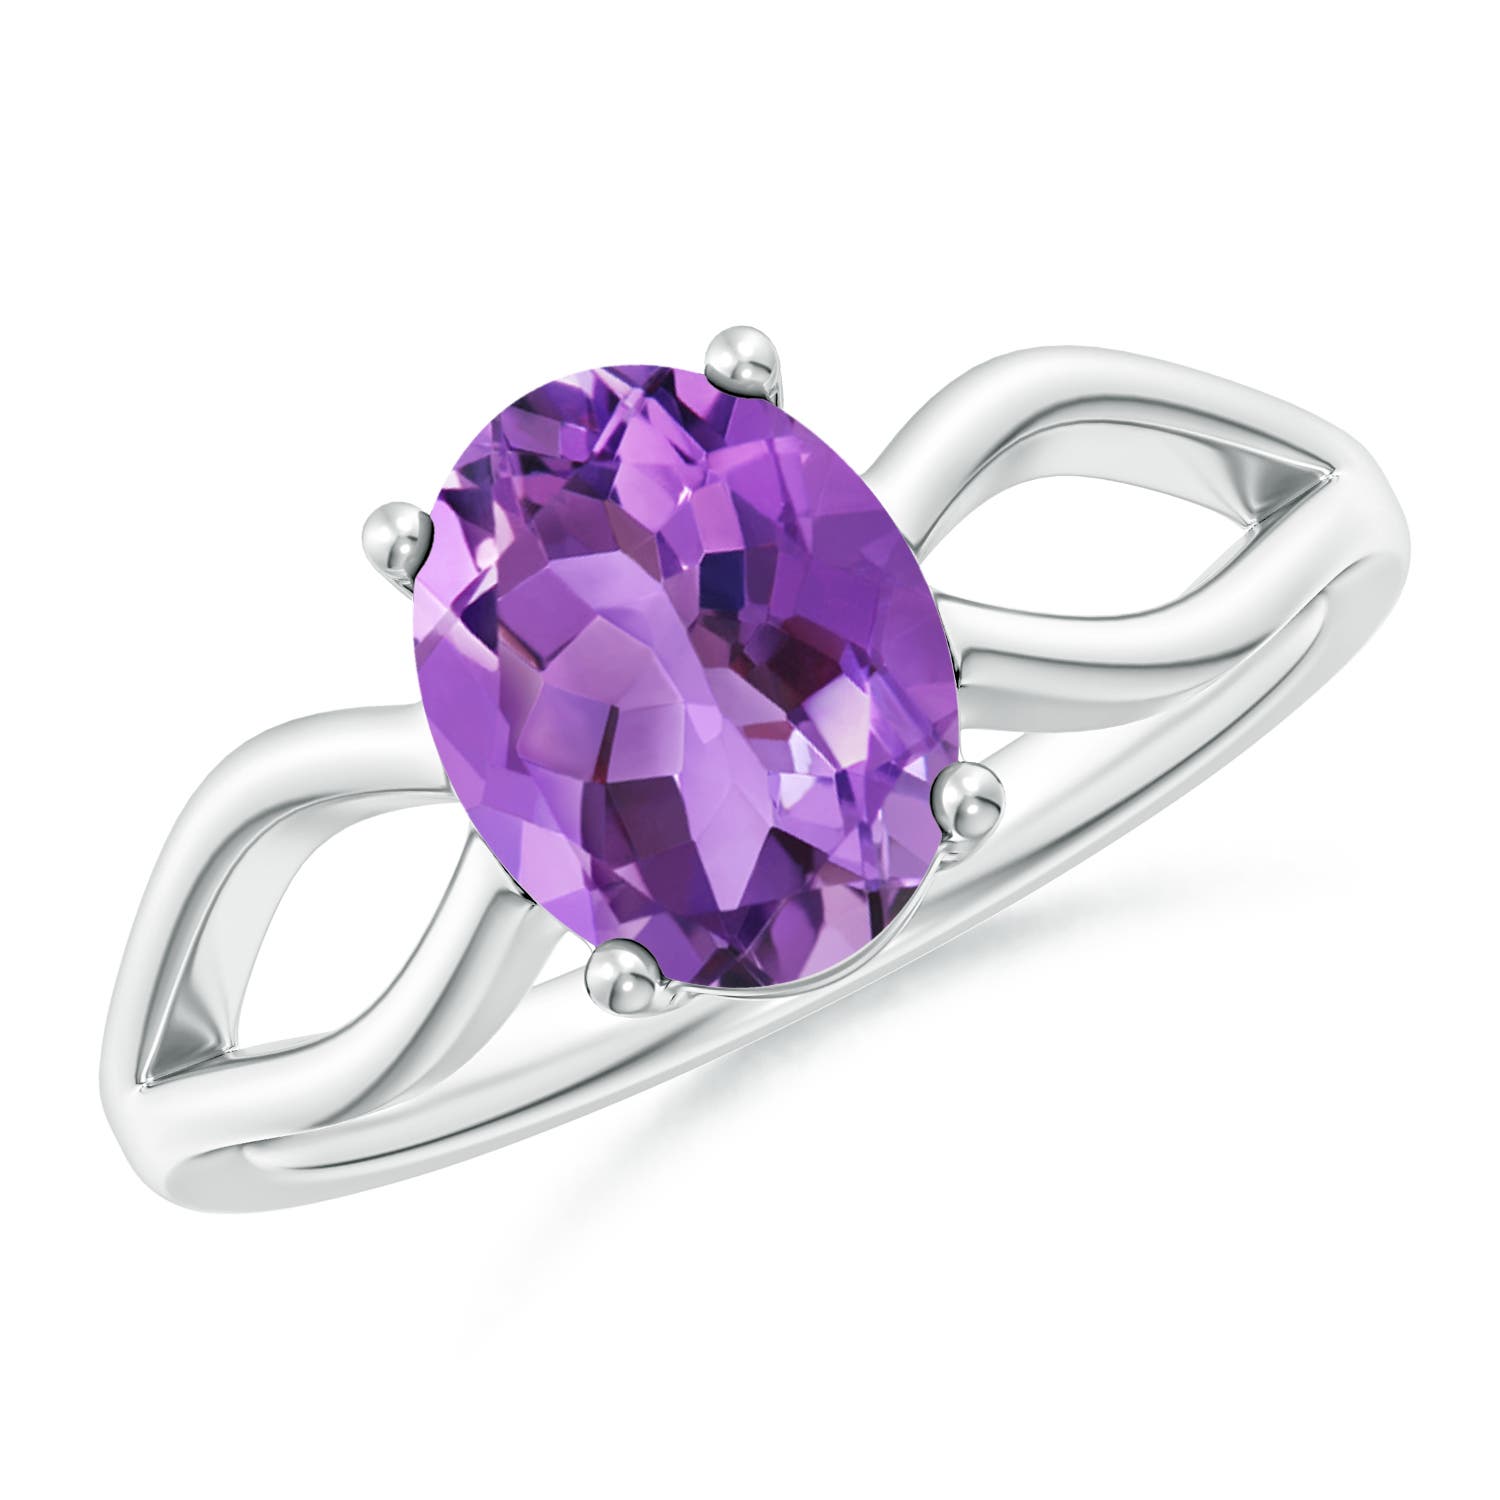 AA - Amethyst / 1.6 CT / 14 KT White Gold